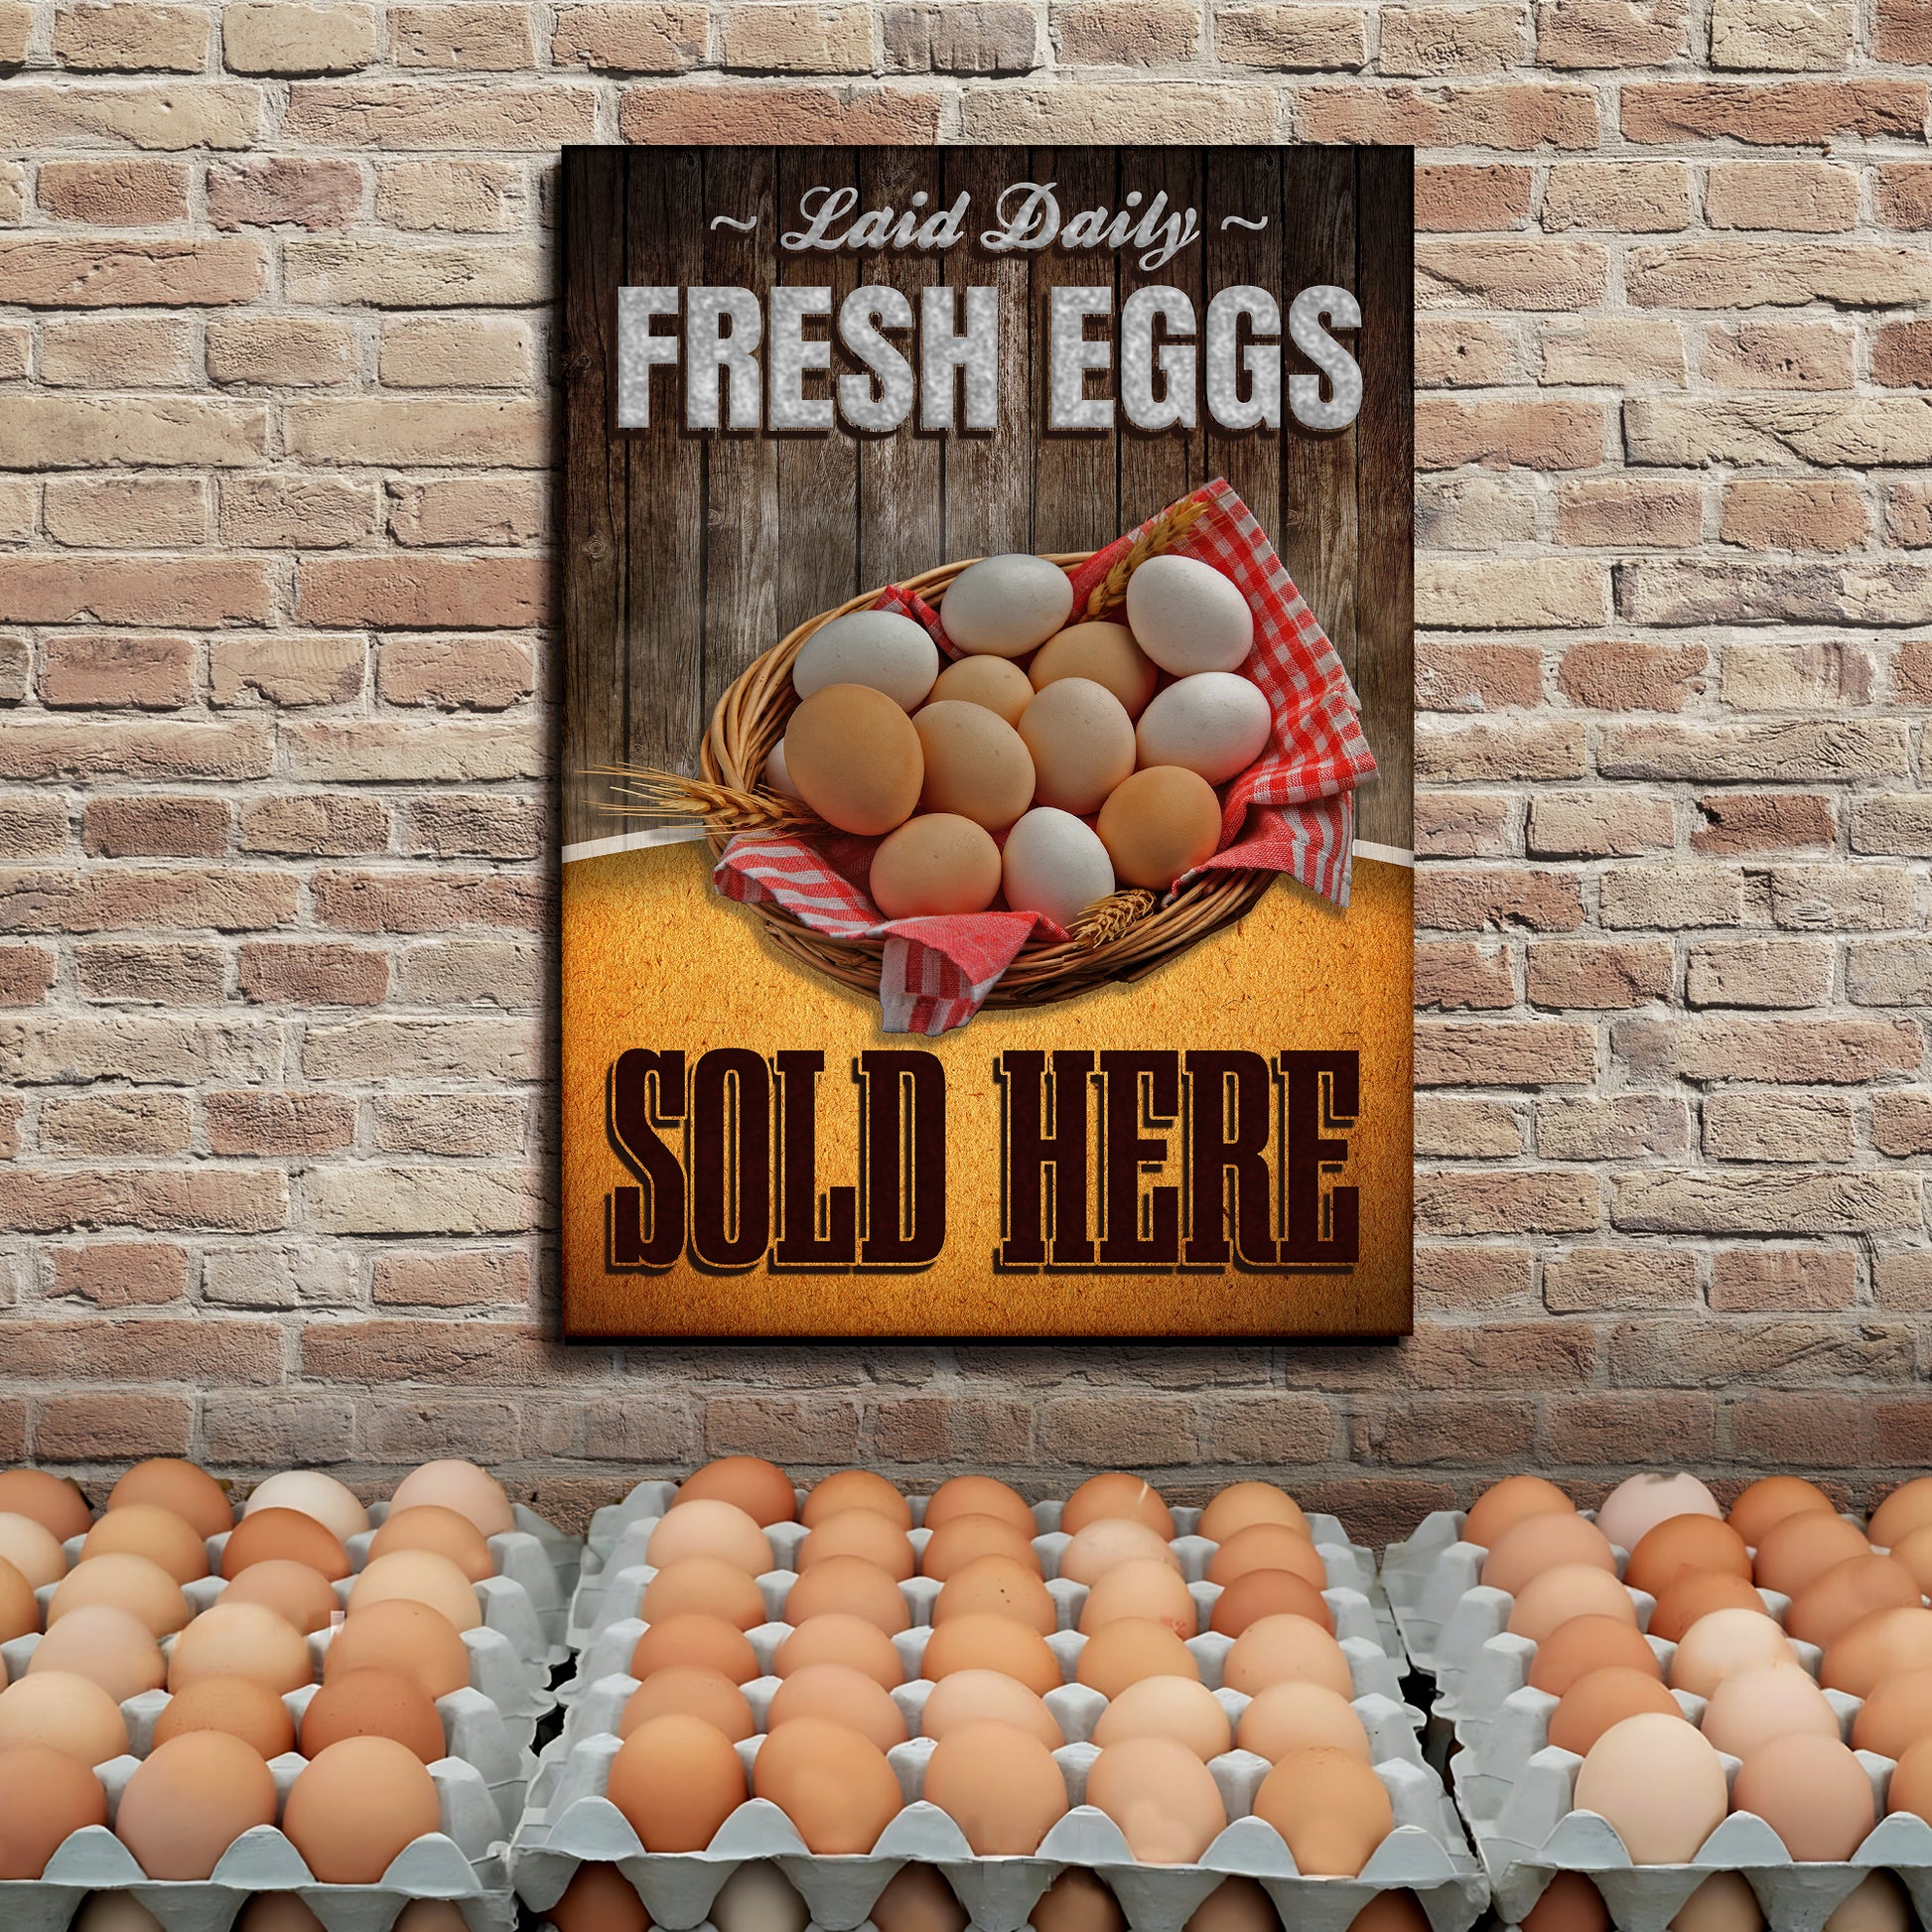 Sold Here Laid Daily Farm Fresh Eggs Sign Style 1 - Image by Tailored Canvases